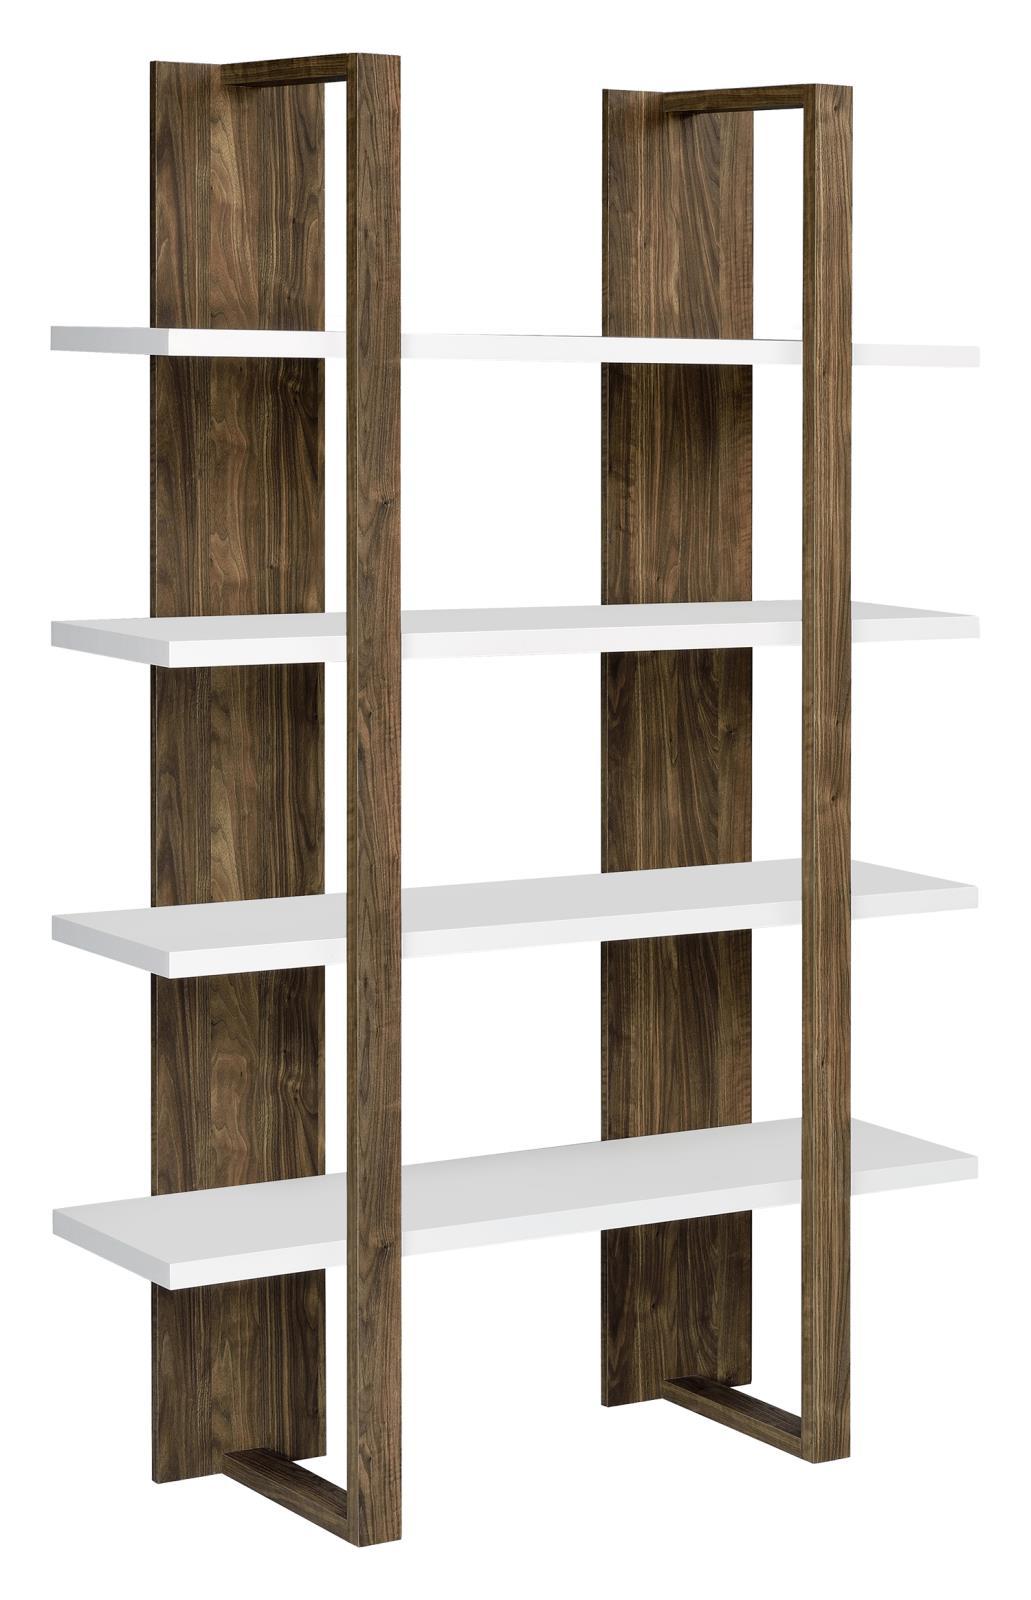 Danbrook Bookcase with 4 Full-length Shelves Danbrook Bookcase with 4 Full-length Shelves Half Price Furniture